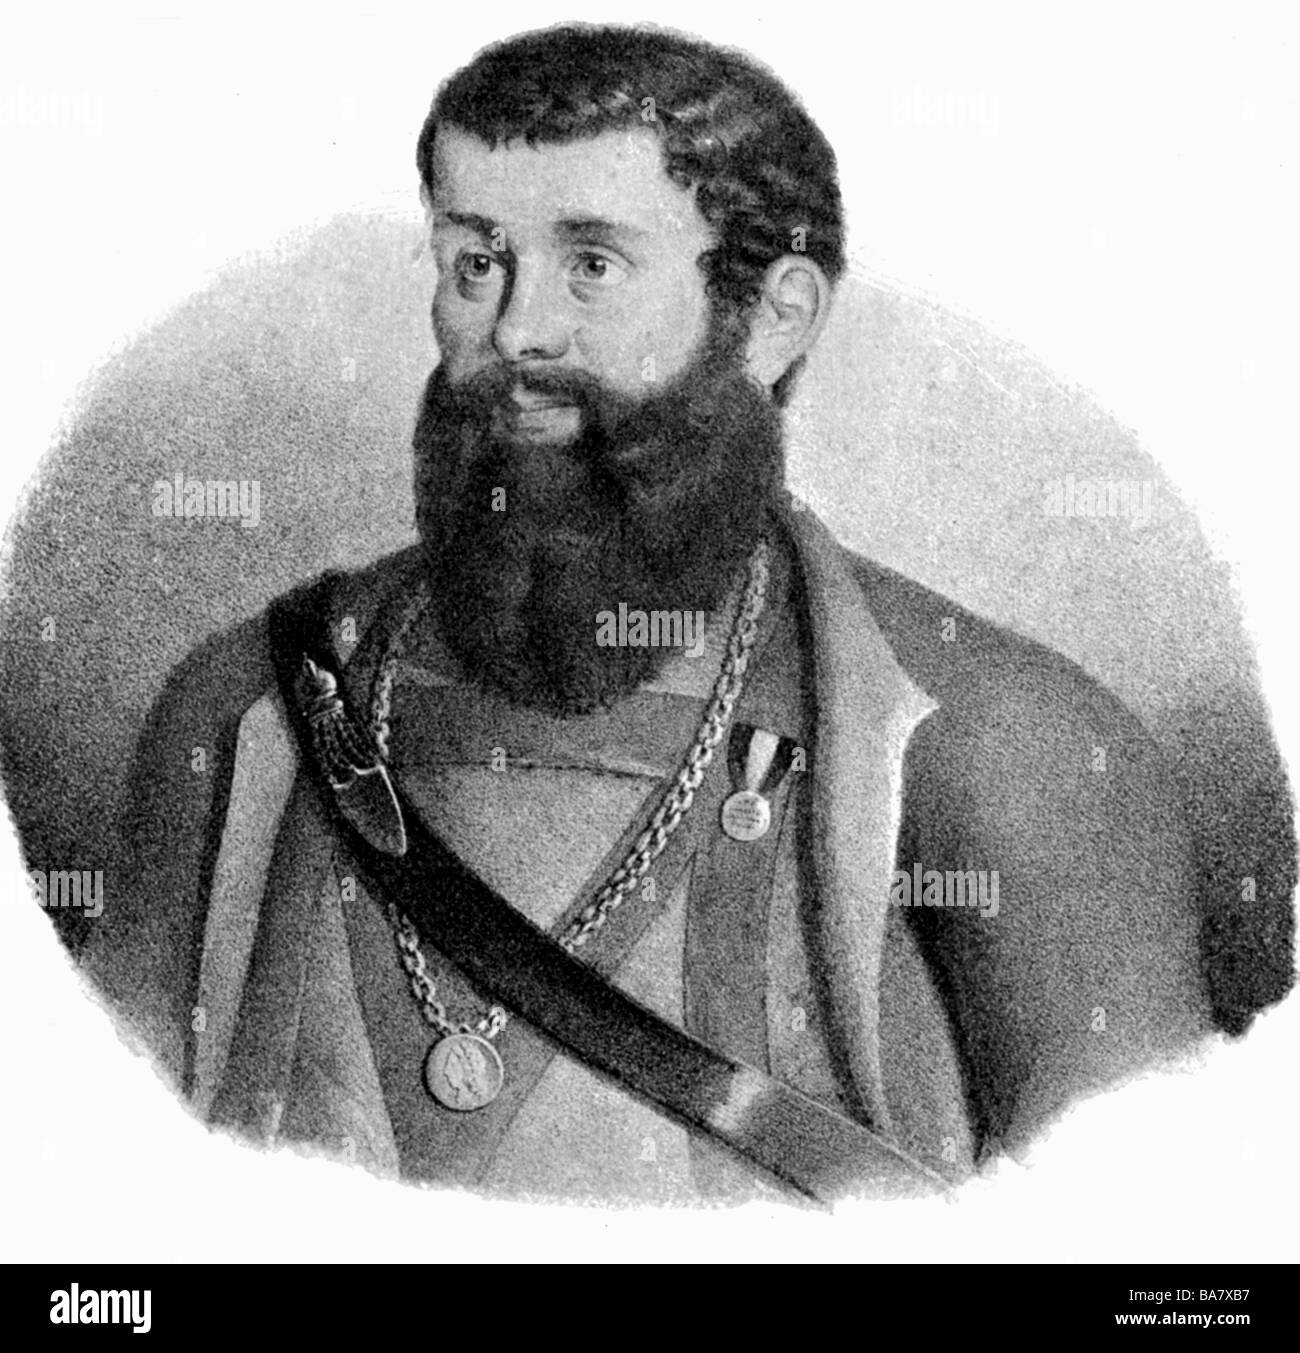 Hofer, Andreas, 22.11.1767 - 20.2.1810, Tyrolian freedom fighter, portrait, lithograph, 19th century, , Stock Photo